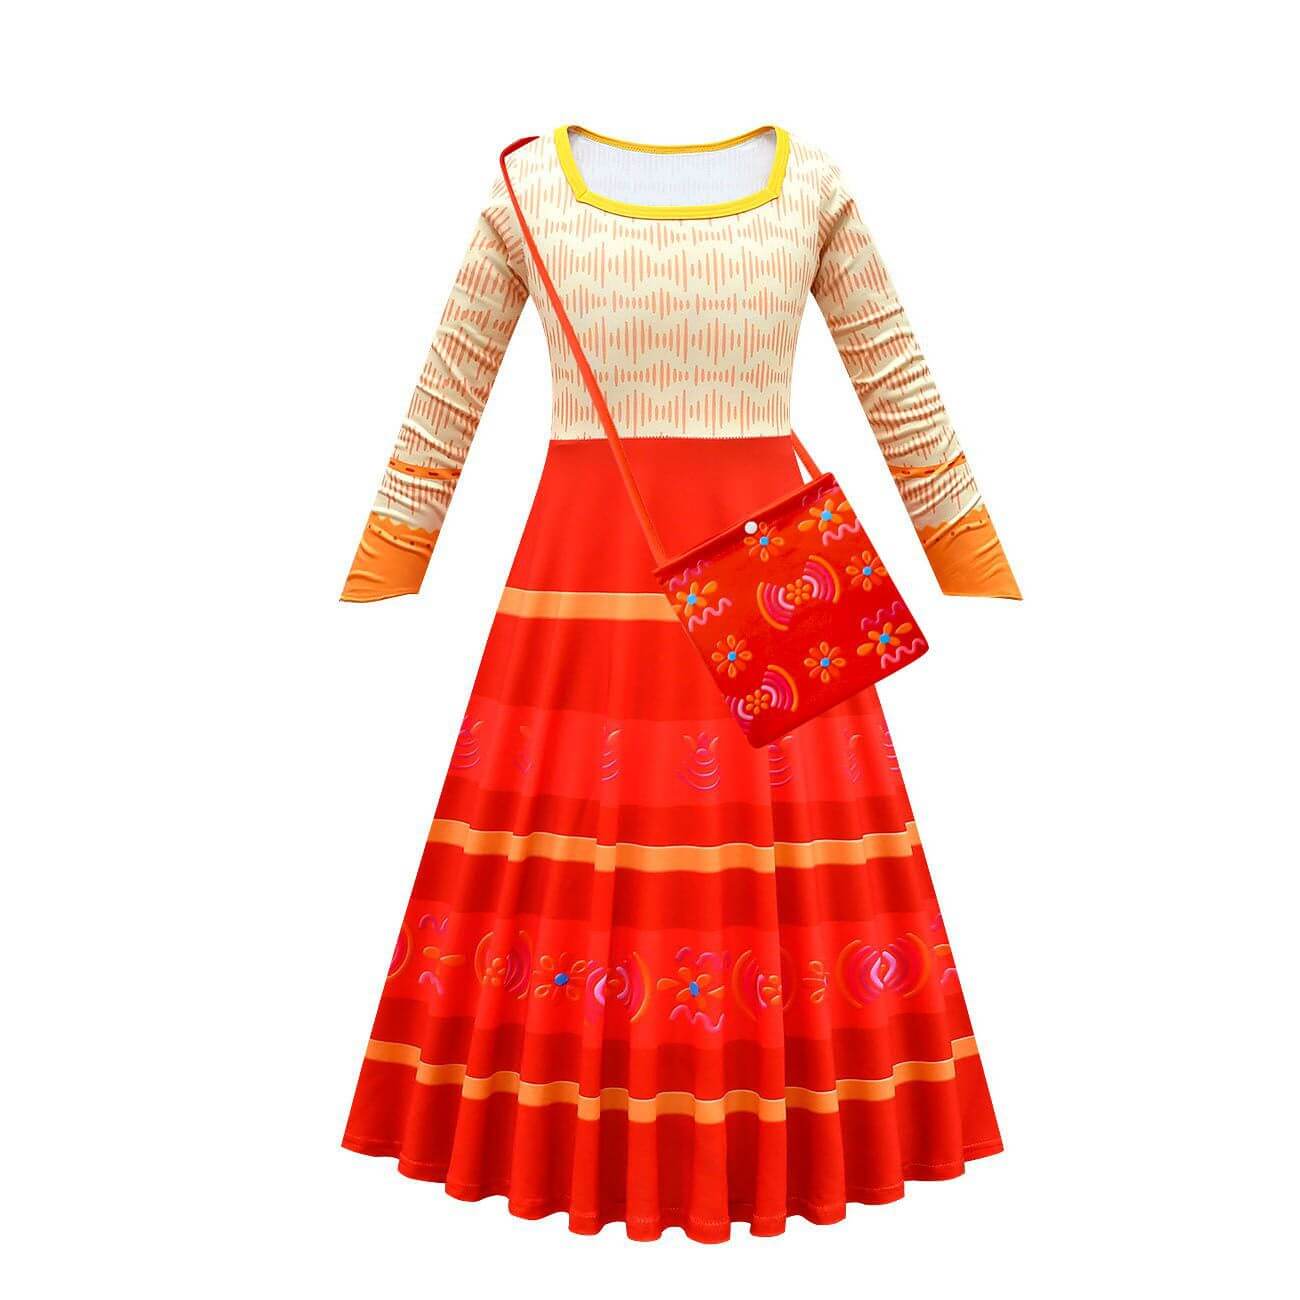 Kids Dolores Dress Magic Family Madrigal Cosplay Costume Girls A-line Swing Princess Dress